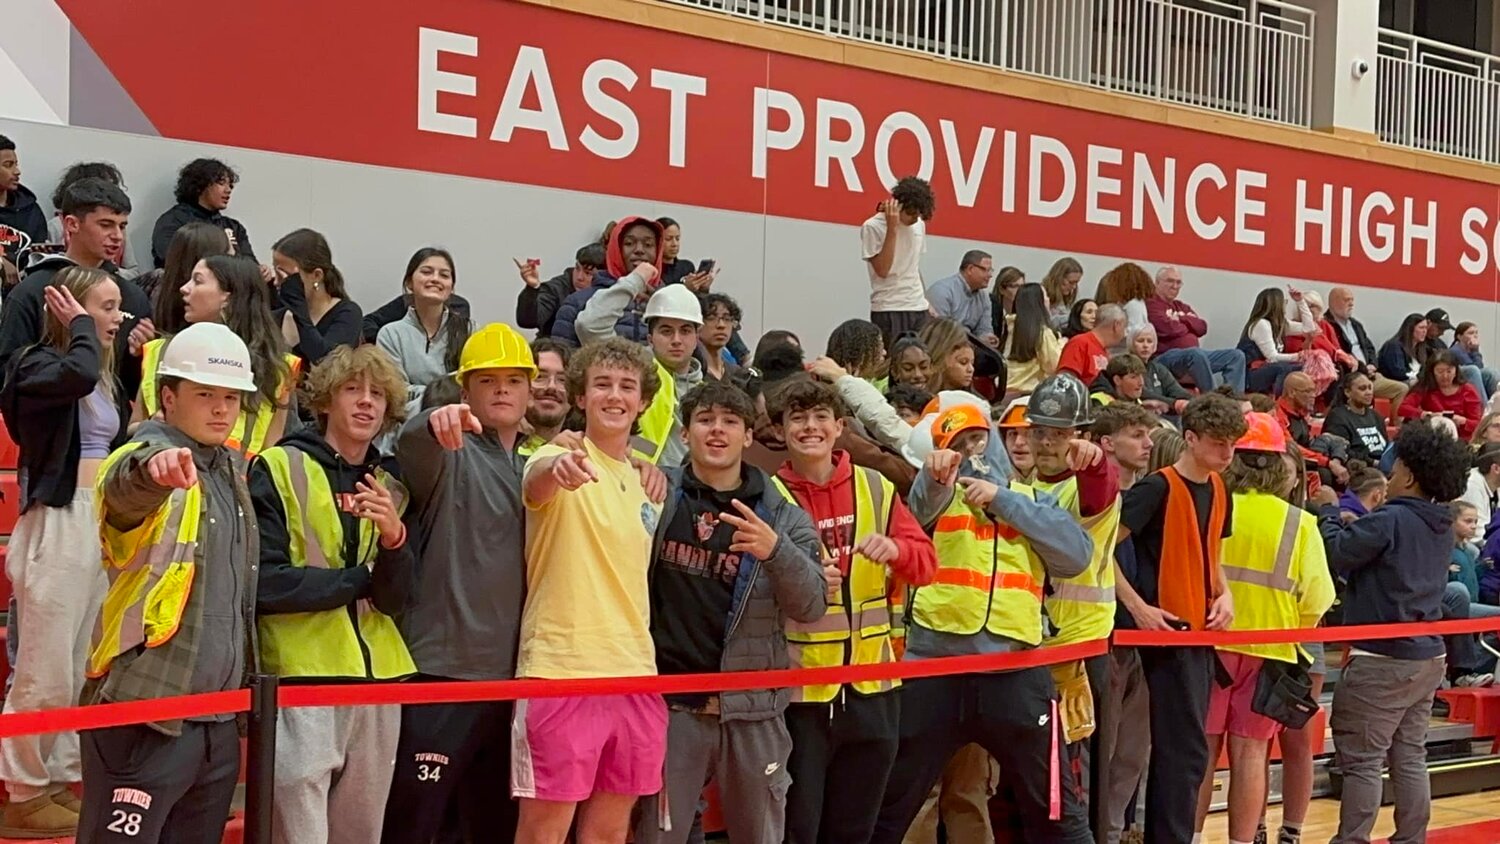 The HERD at volleyball quarterfinals November 2nd. Construction worker theme